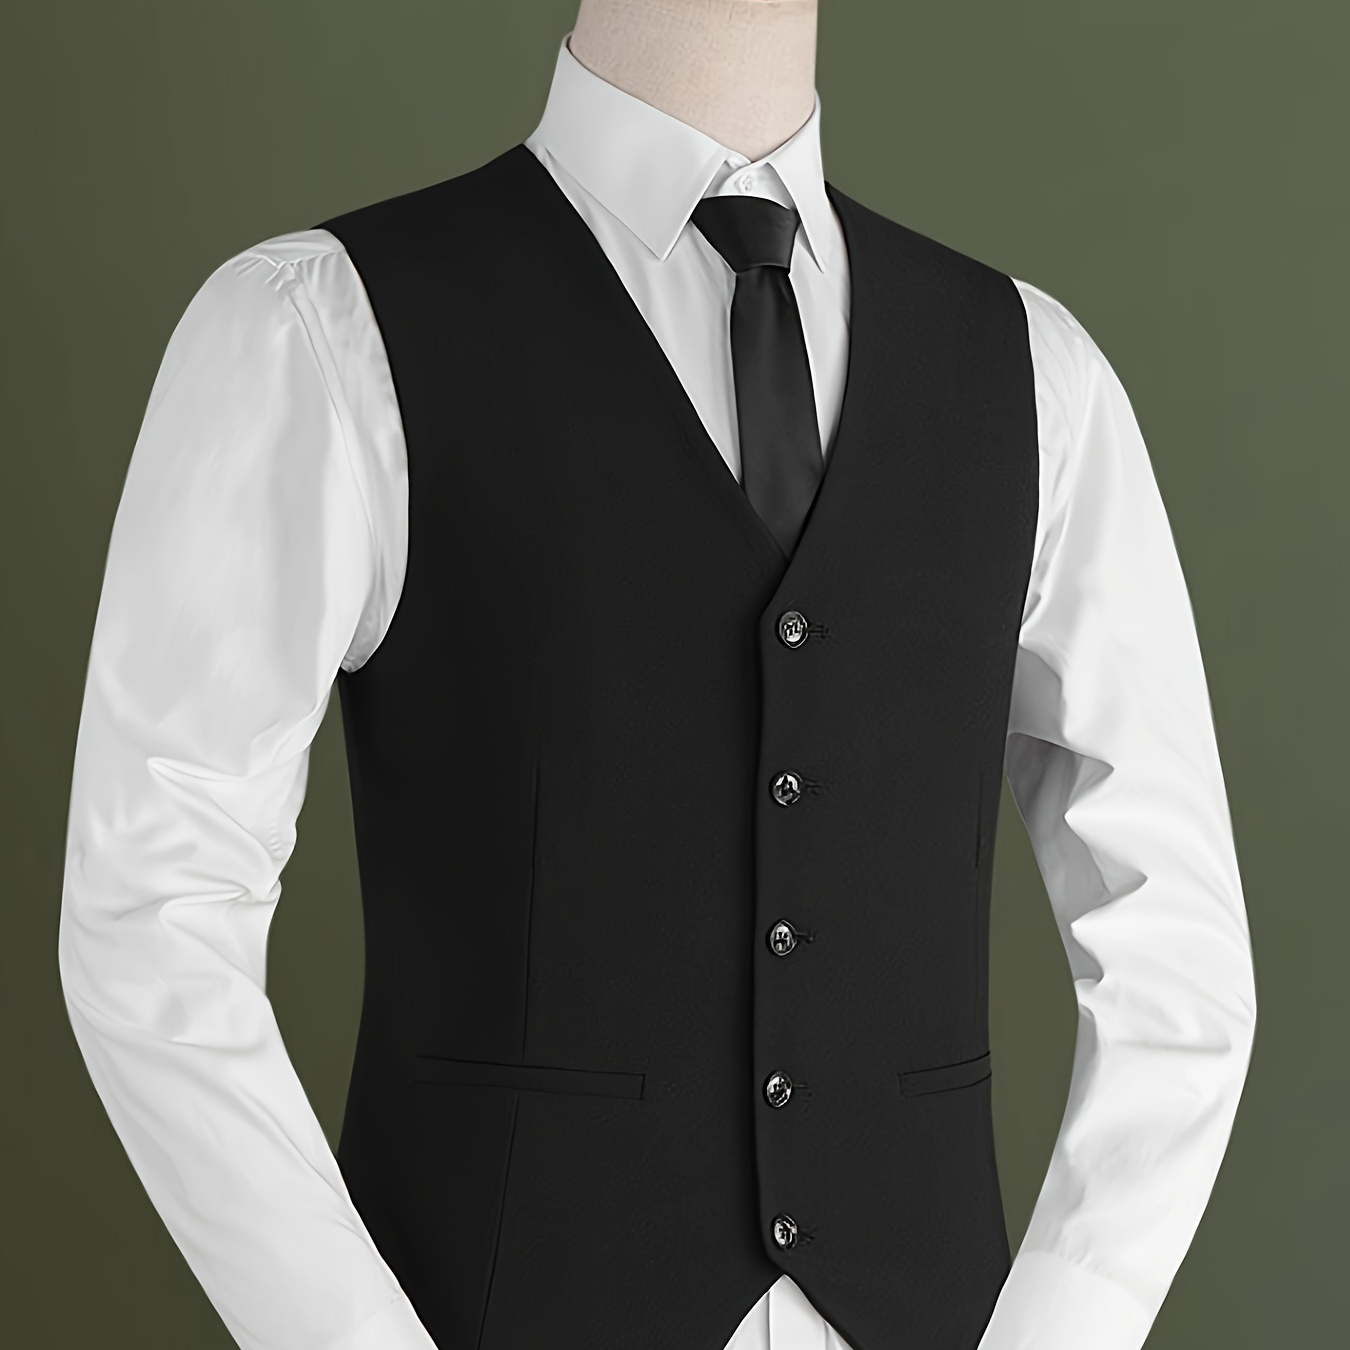 

V Neck Smart Suit Vest, Men's Casual Retro Style Solid Color Single Breasted Waistcoat For Spring Fall Dinner Suit Match